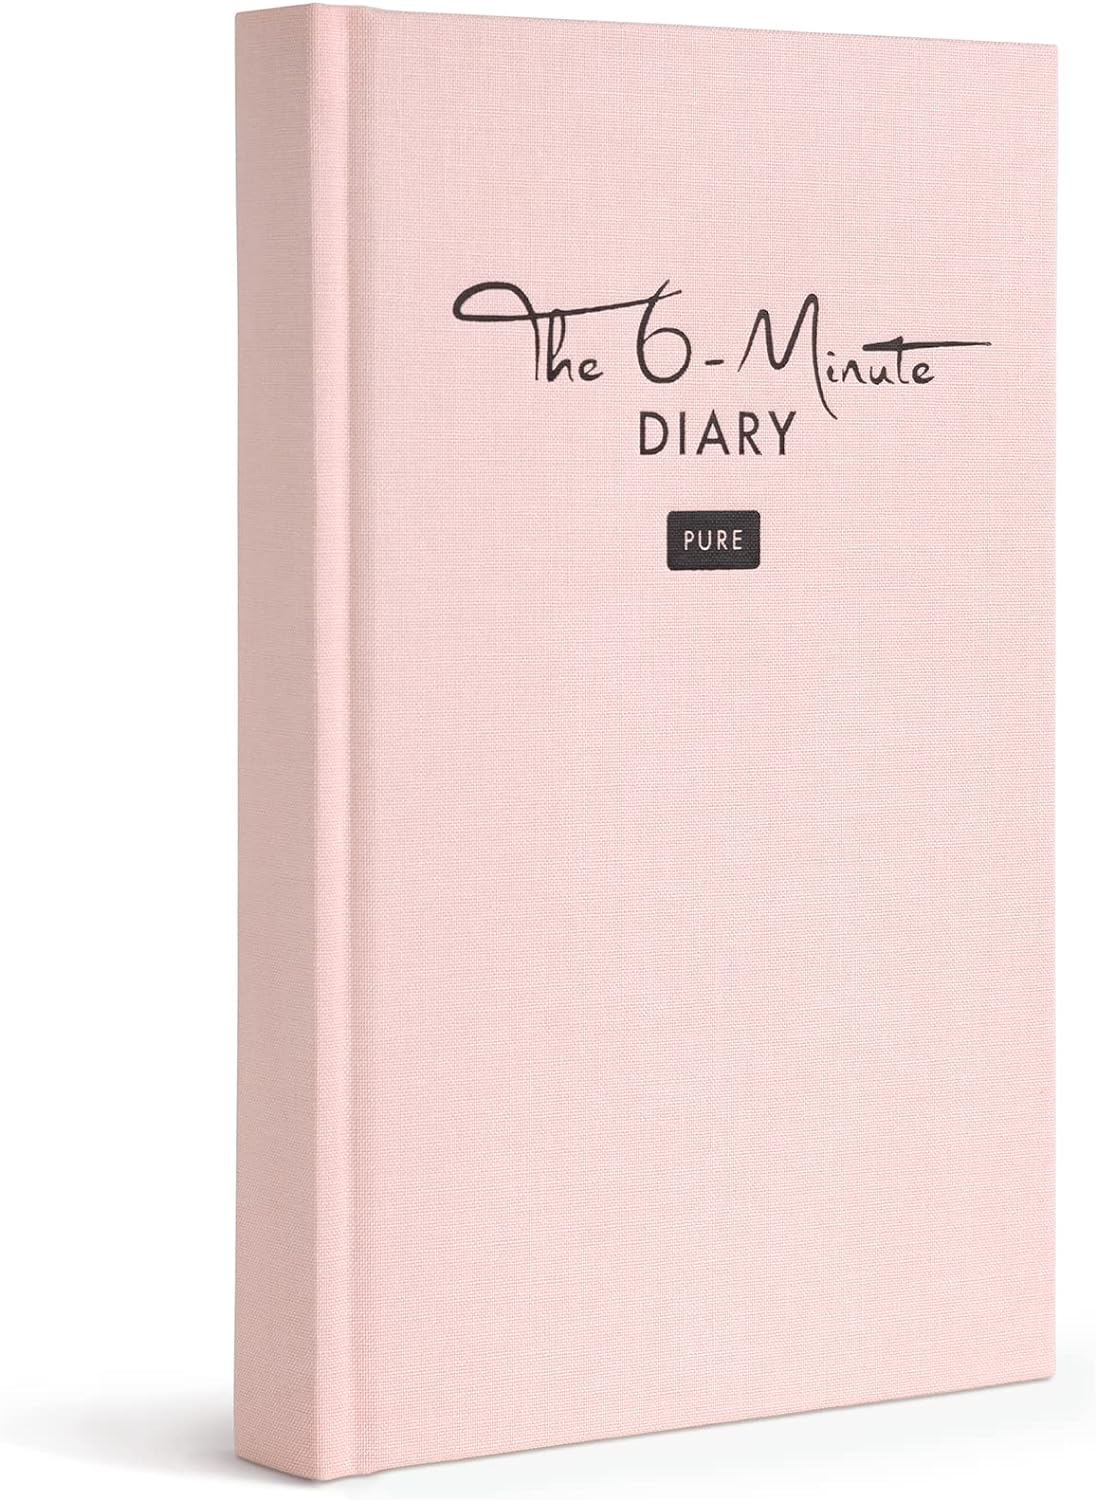 The 6-Minute Diary Pure (The Original) | Gratitude Journal for Women and Men | Mental Health & Self Care Journal for more Wellbeing and Positivity